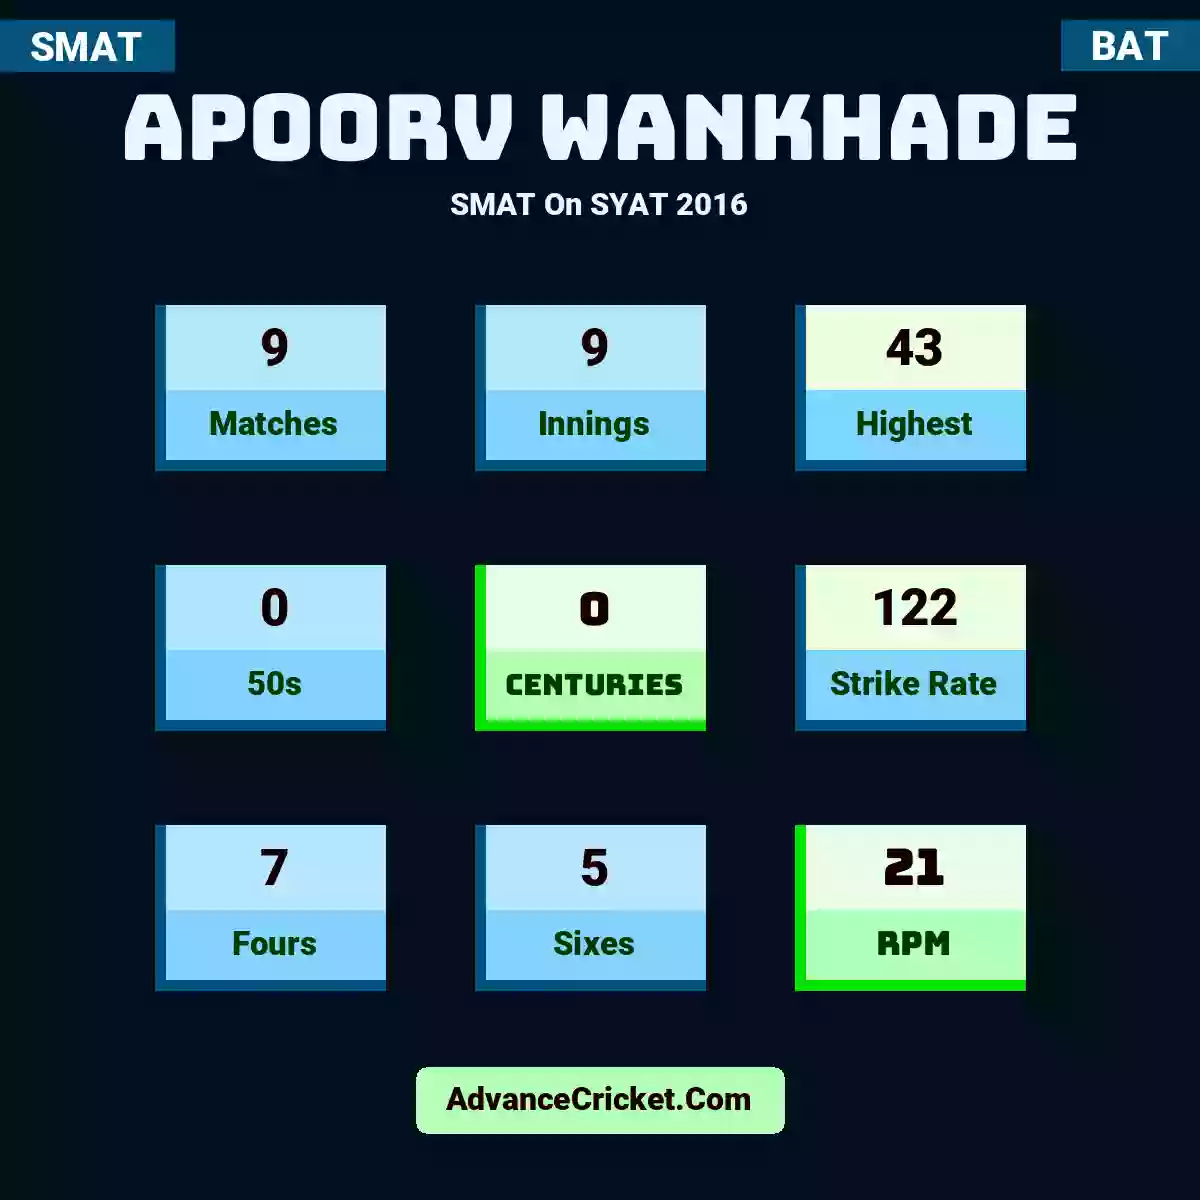 Apoorv Wankhade SMAT  On SYAT 2016, Apoorv Wankhade played 9 matches, scored 43 runs as highest, 0 half-centuries, and 0 centuries, with a strike rate of 122. A.Wankhade hit 7 fours and 5 sixes, with an RPM of 21.